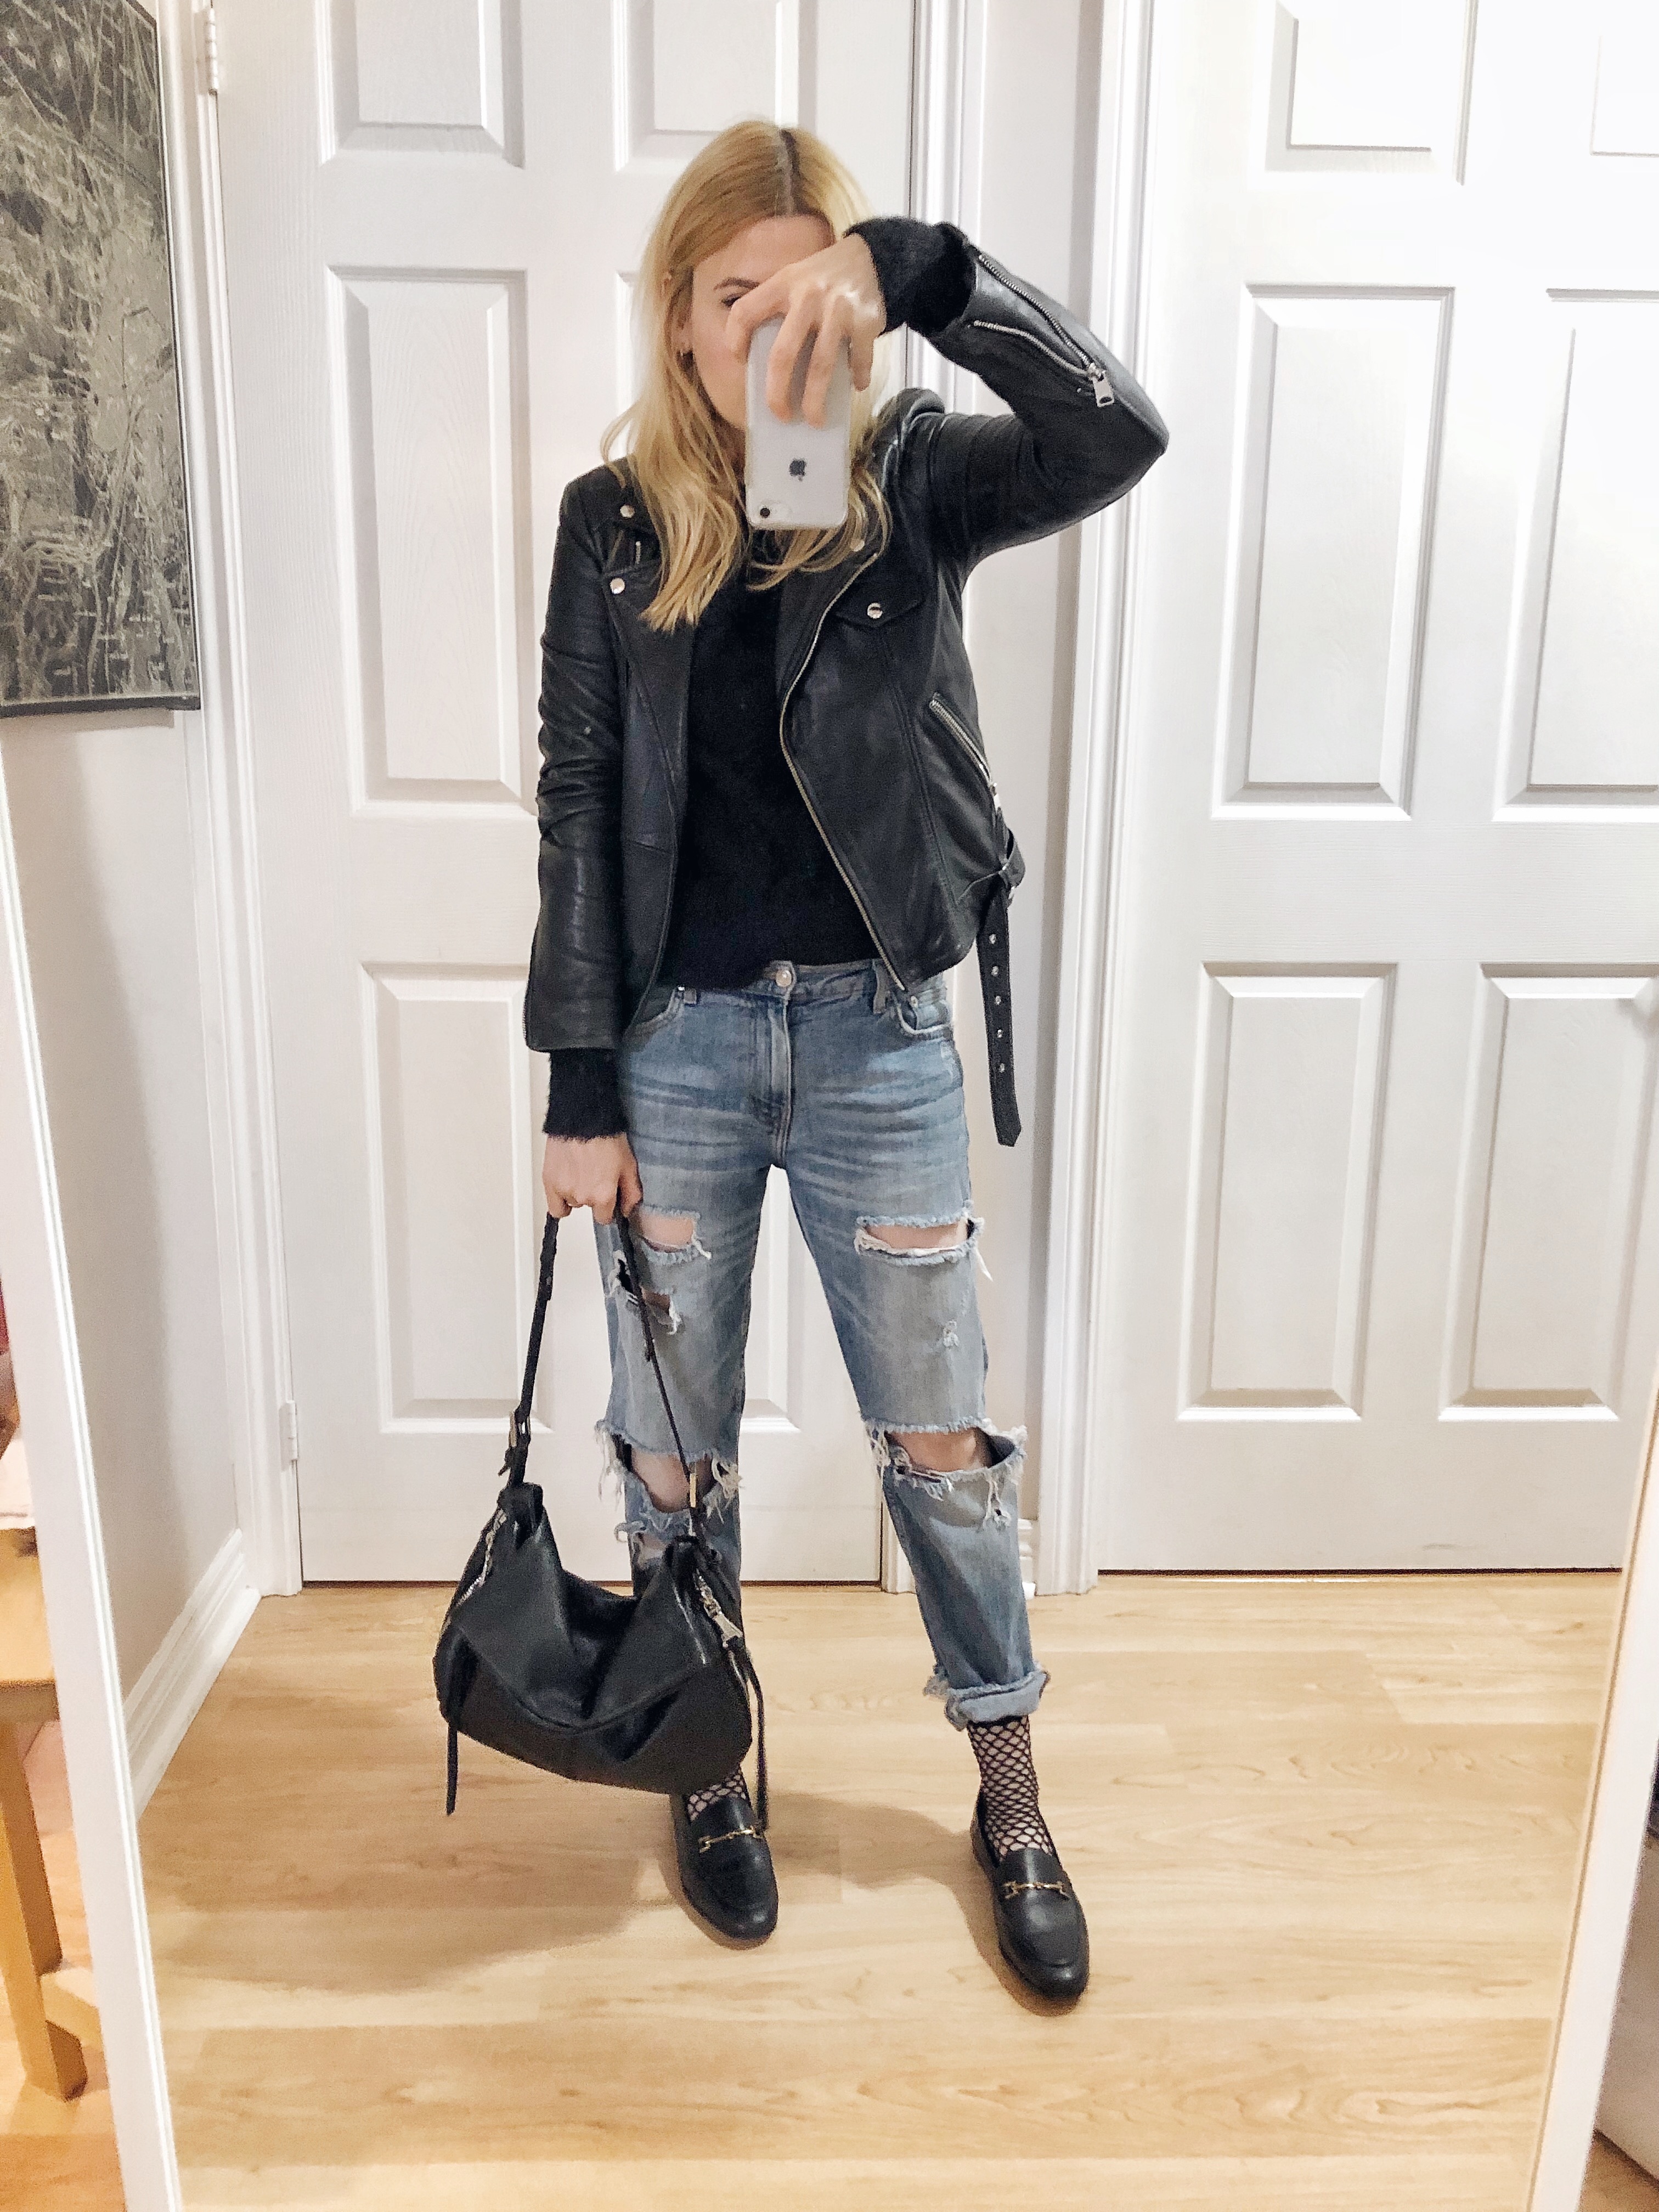 What I wore. A black sweater, moto jacket, with boyfriend jeans, and Sam Edelman Loafers.